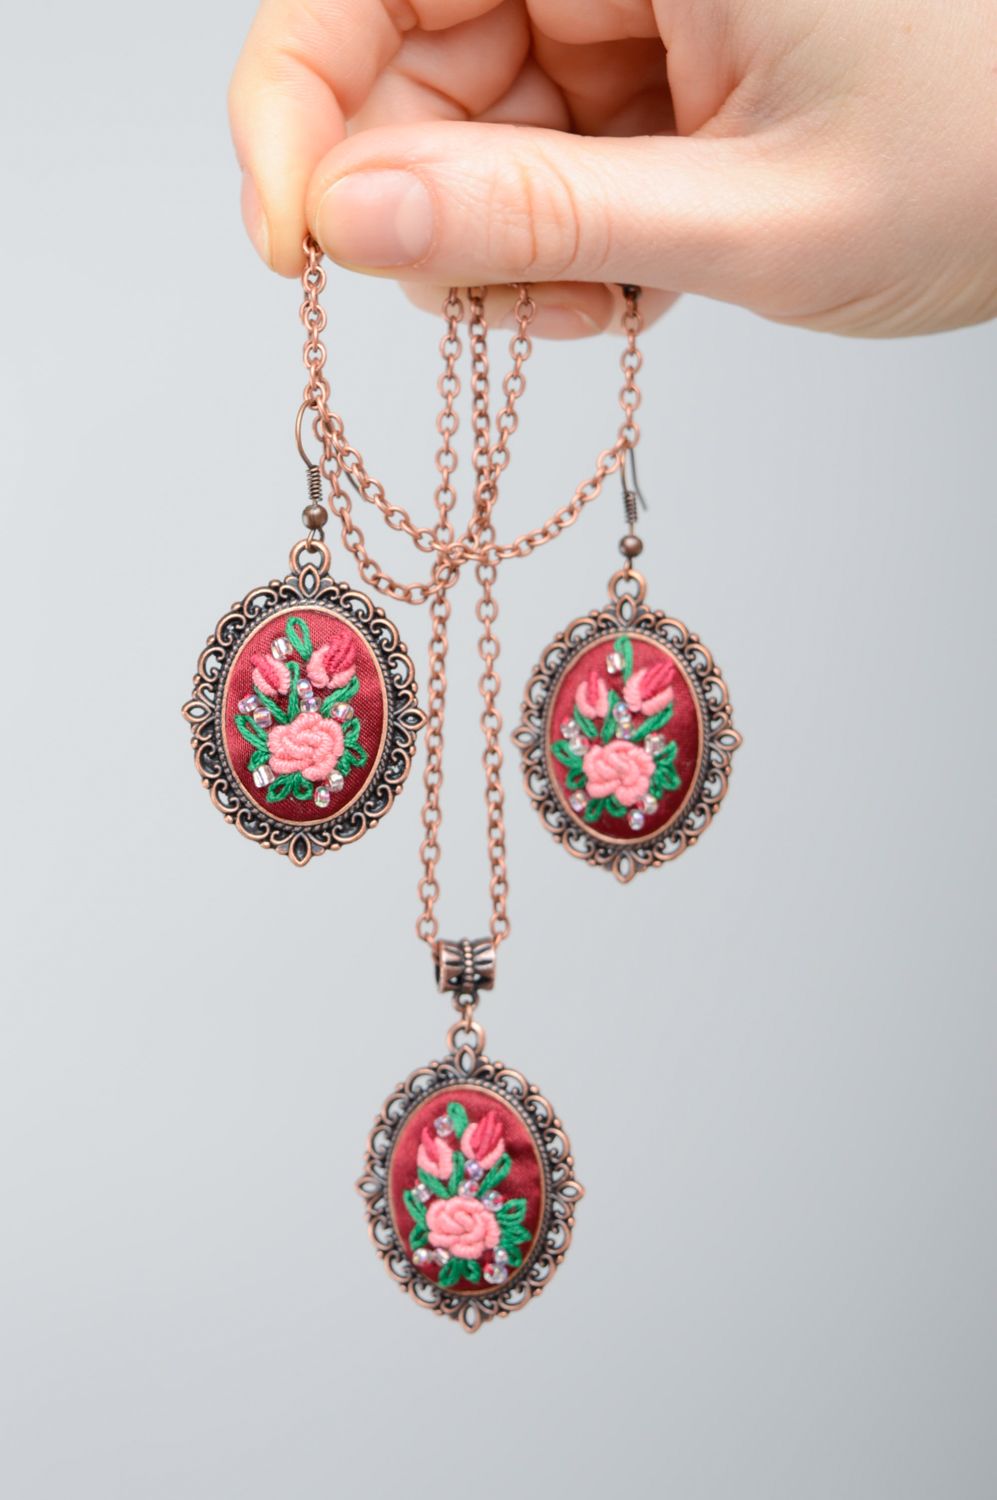 Rococo embroidered earrings and pendant in vintage style photo 2